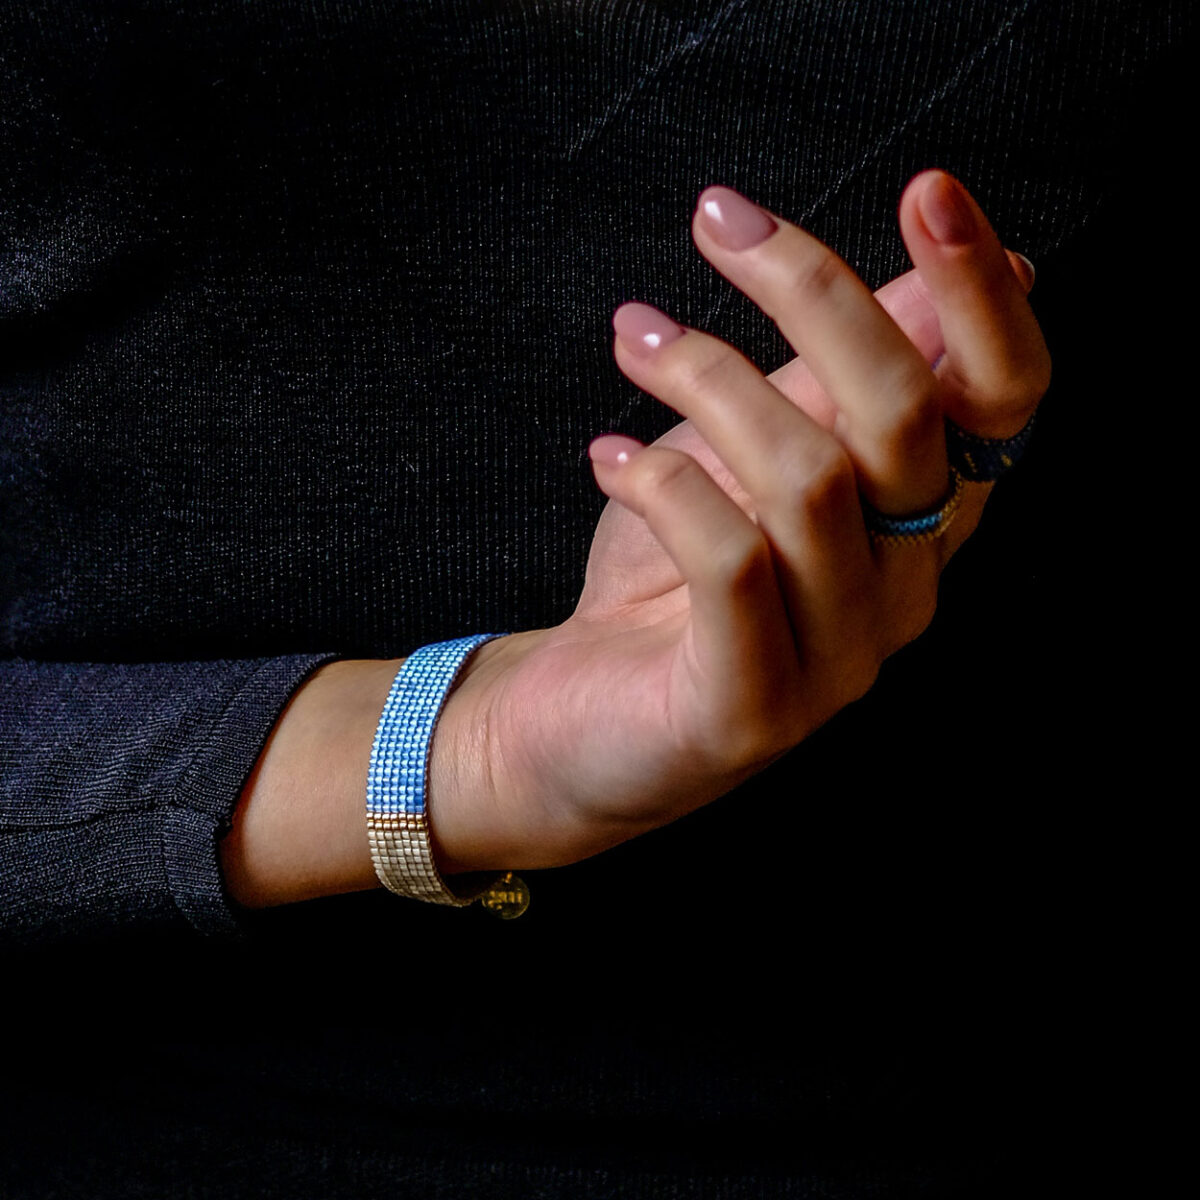 Close-up of a woman's hand and blue beaded bracelets against a black textured background.